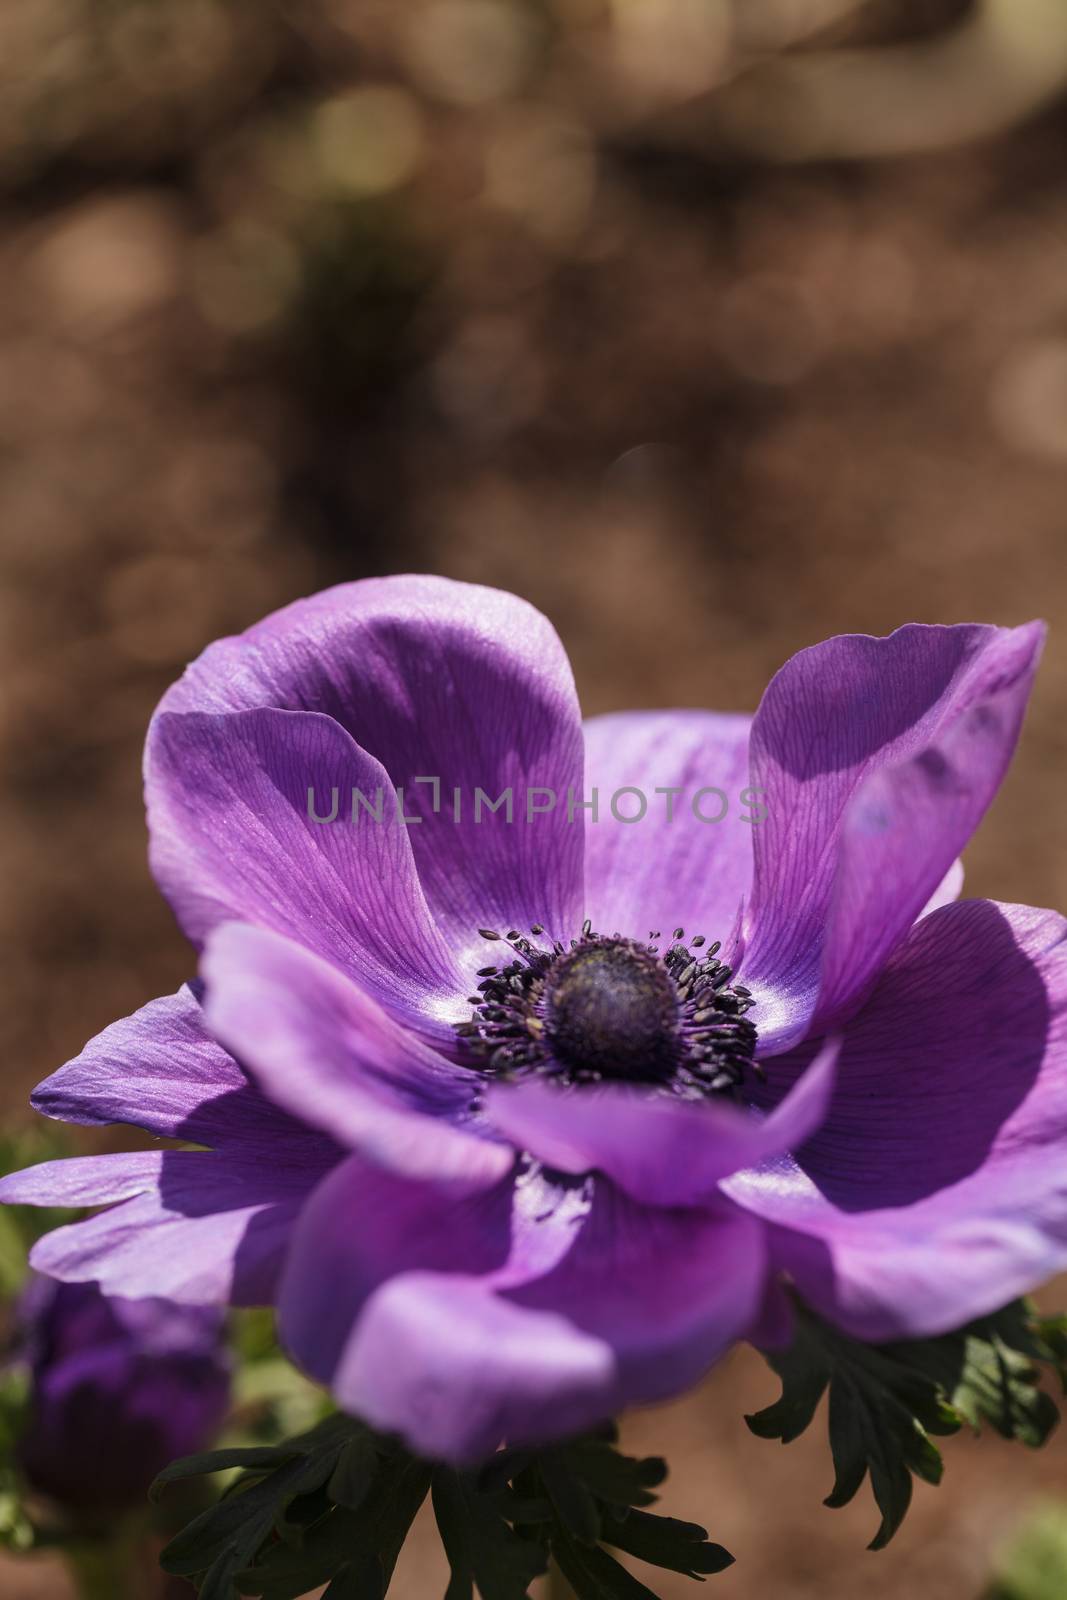 Deep purple flower ‘Mona Lisa Wine’ Anemone coronaria blooms in a botanical garden in winter in Los Angeles, California, United States. It is native to the Mediterranean and is also called the poppy anemone.